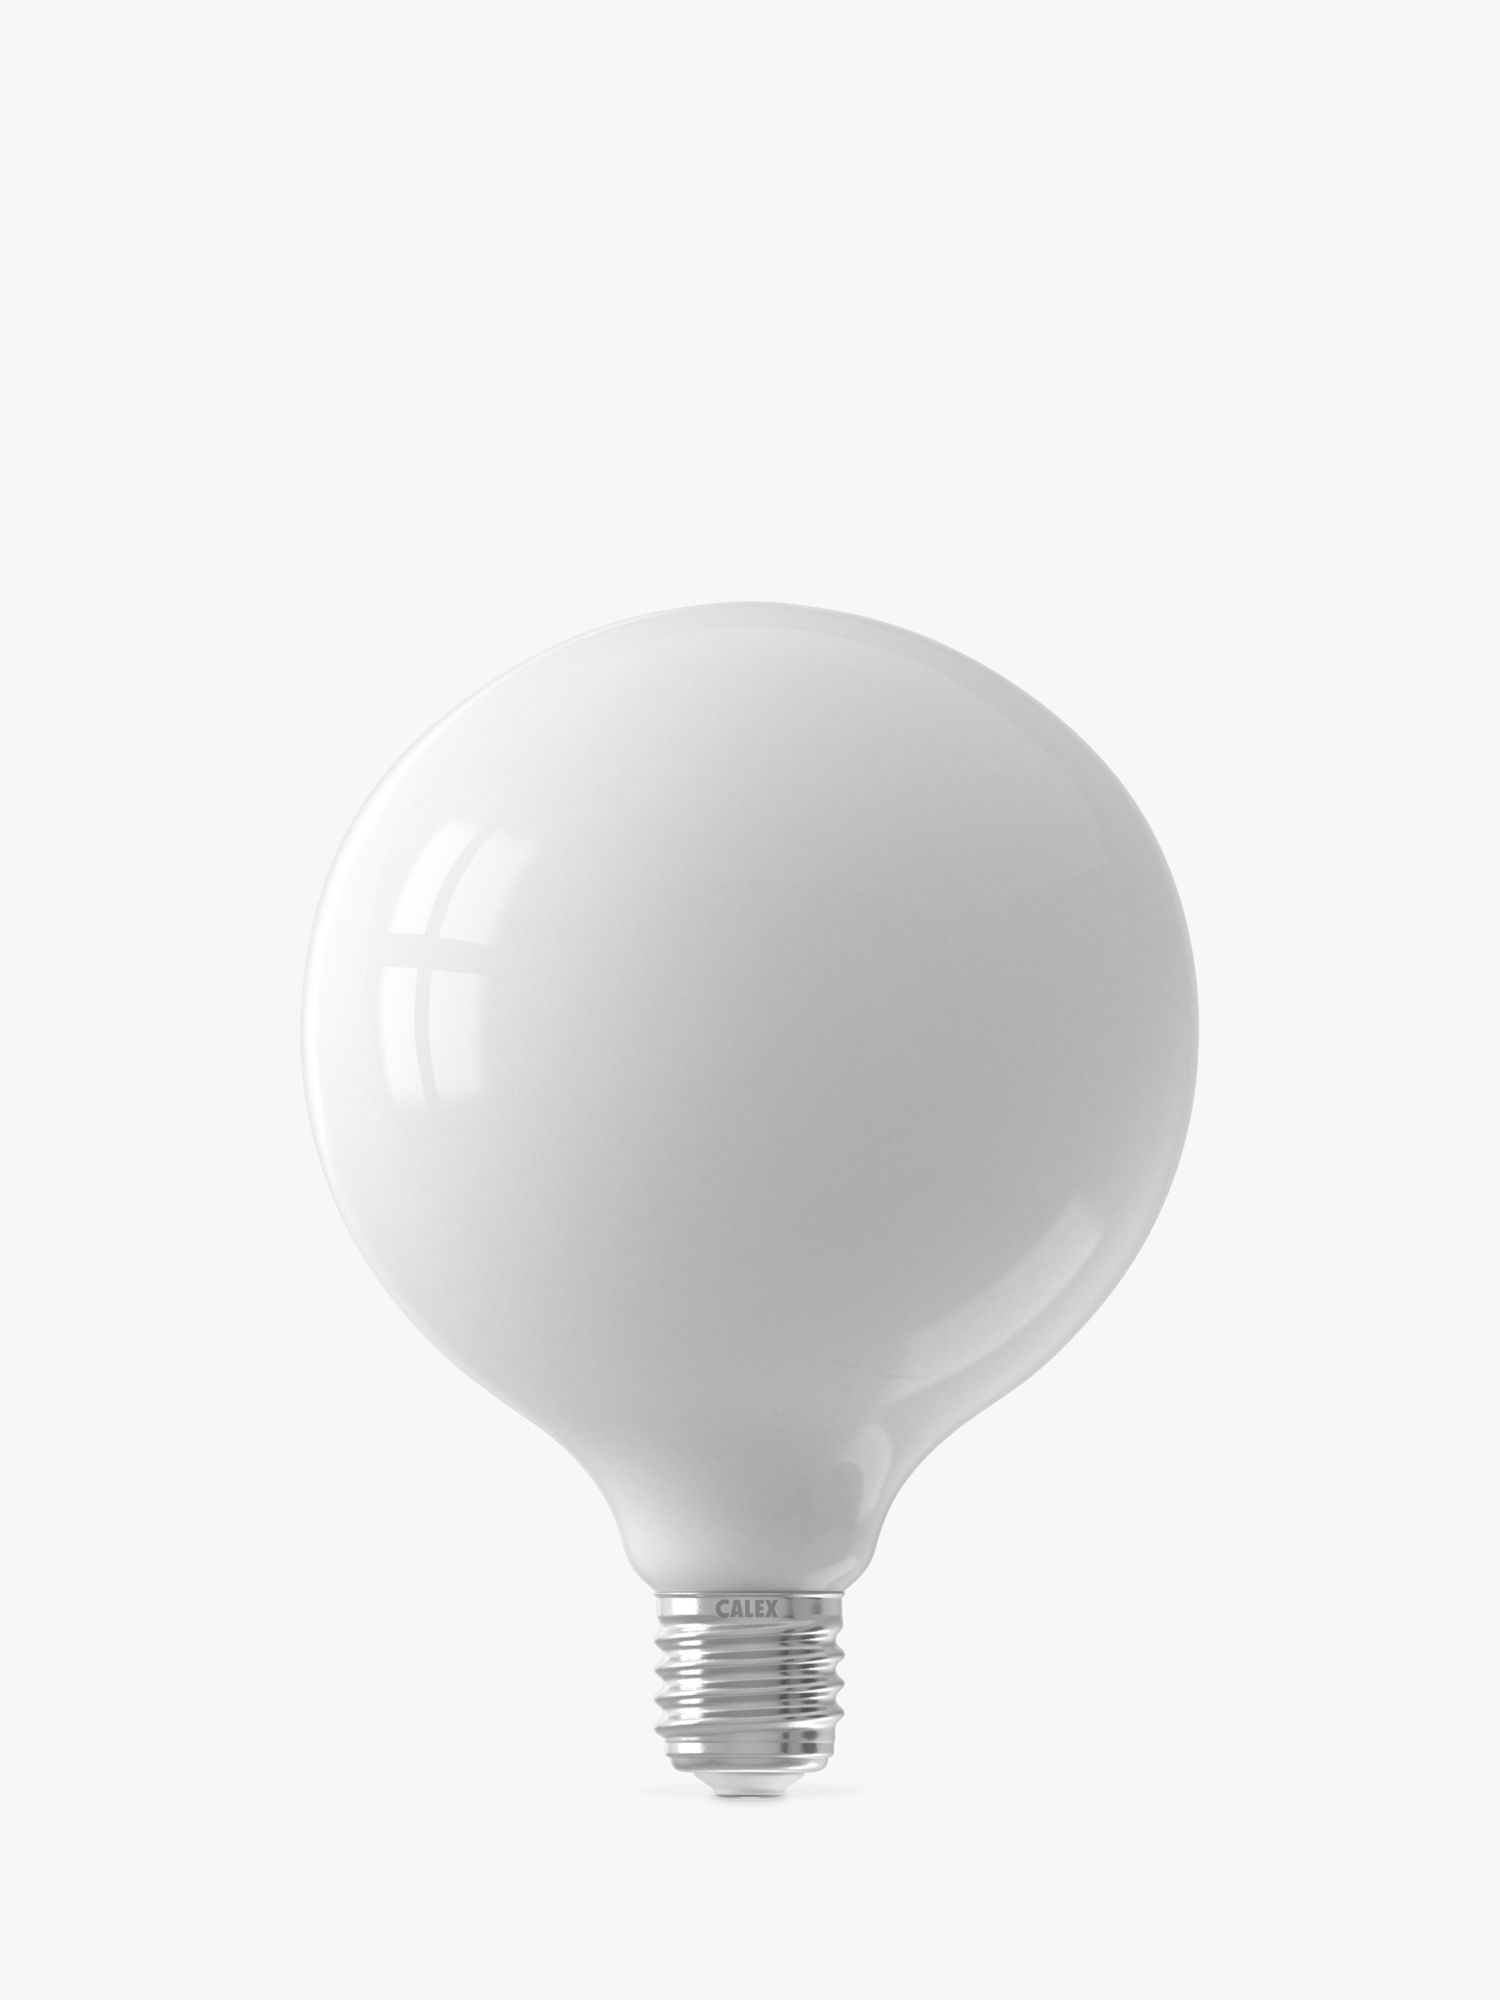 Photo of Calex 9w es led dimmable g125 bulb white